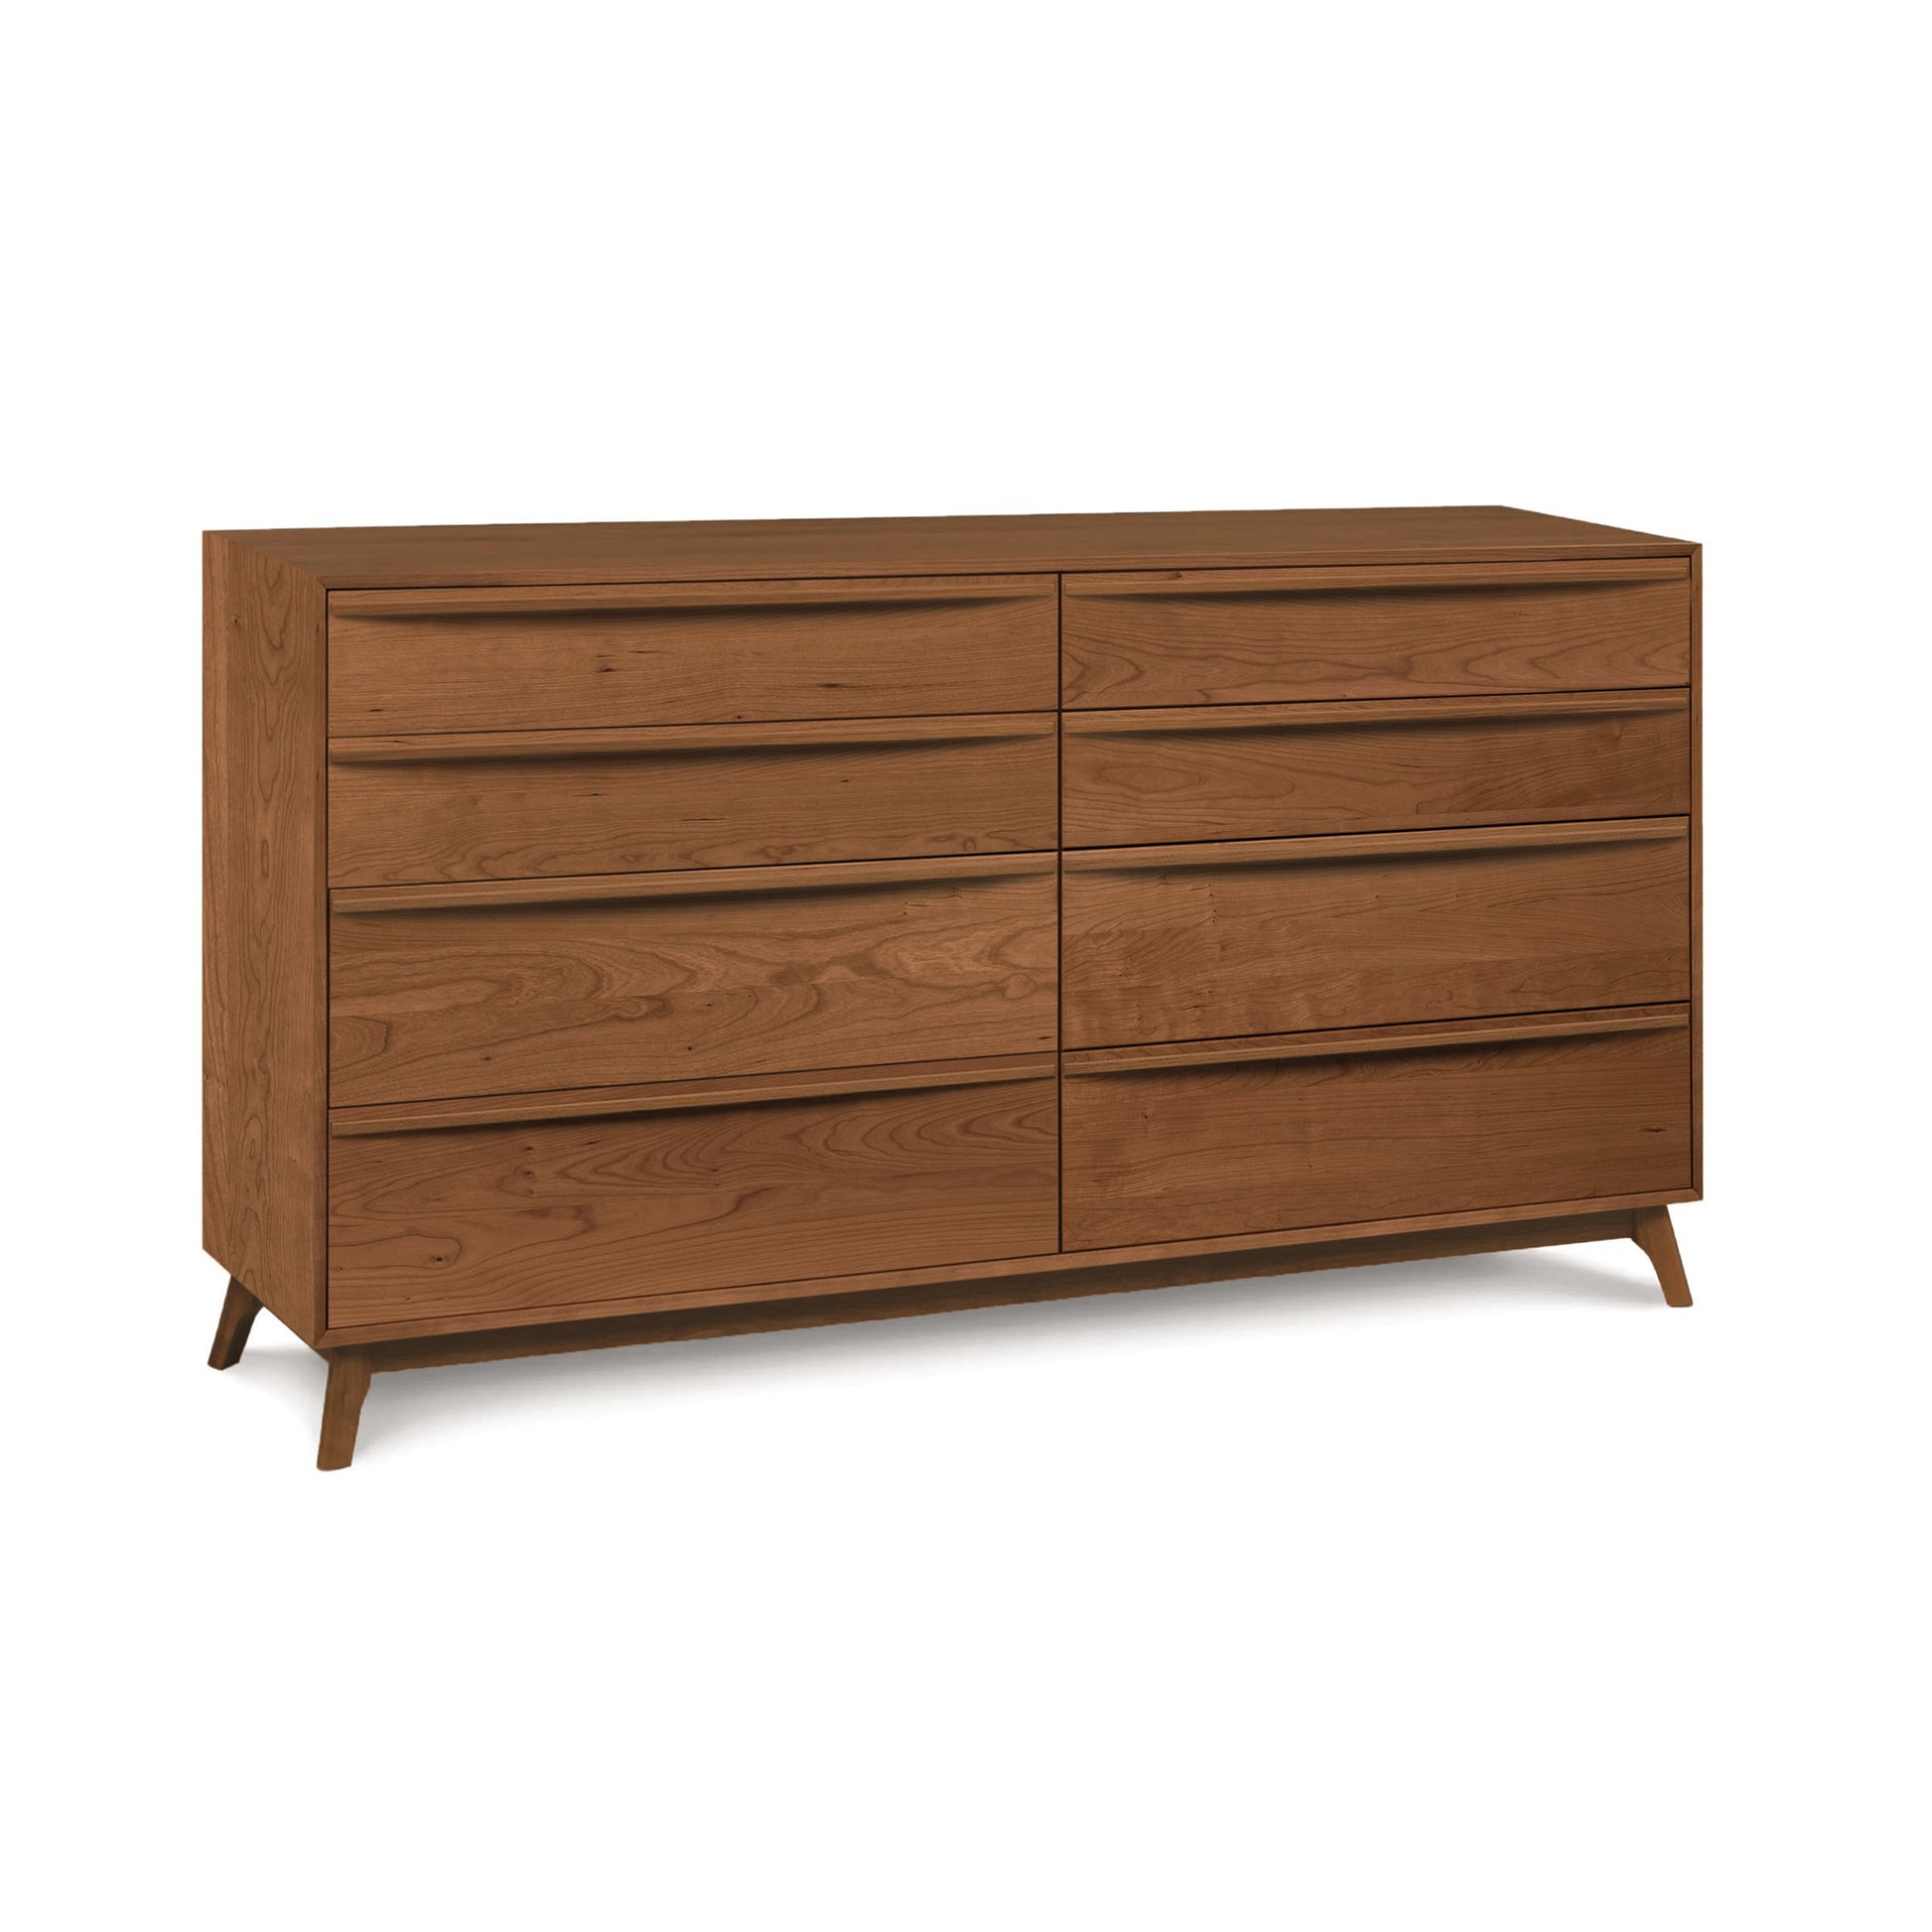 A mid-century modern Catalina 8-Drawer Dresser by Copeland Furniture on a white background.